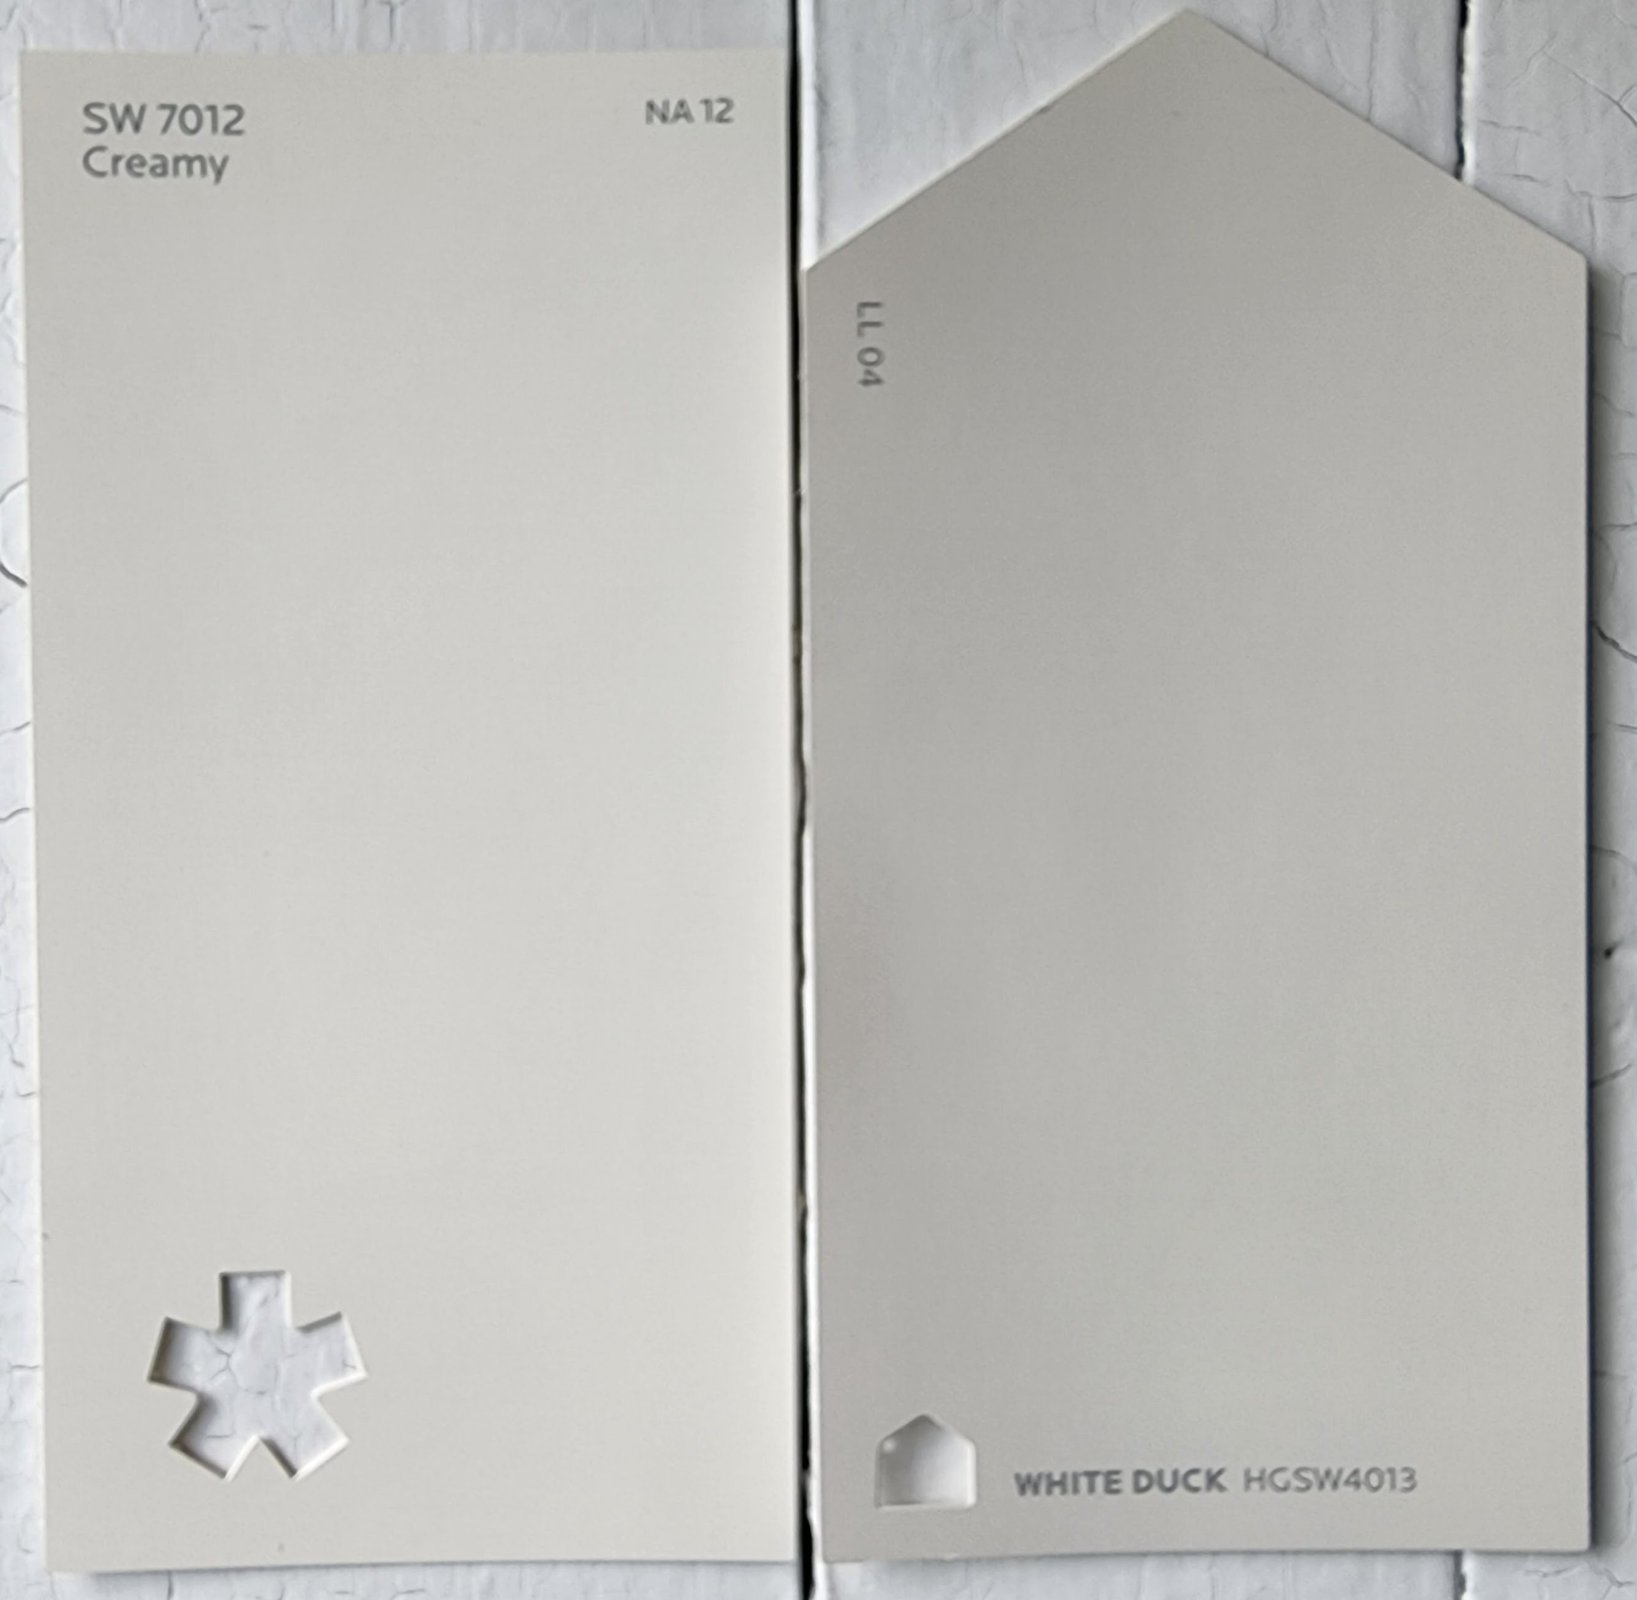  Creamy vs White Duck by Sherwin Williams scaled